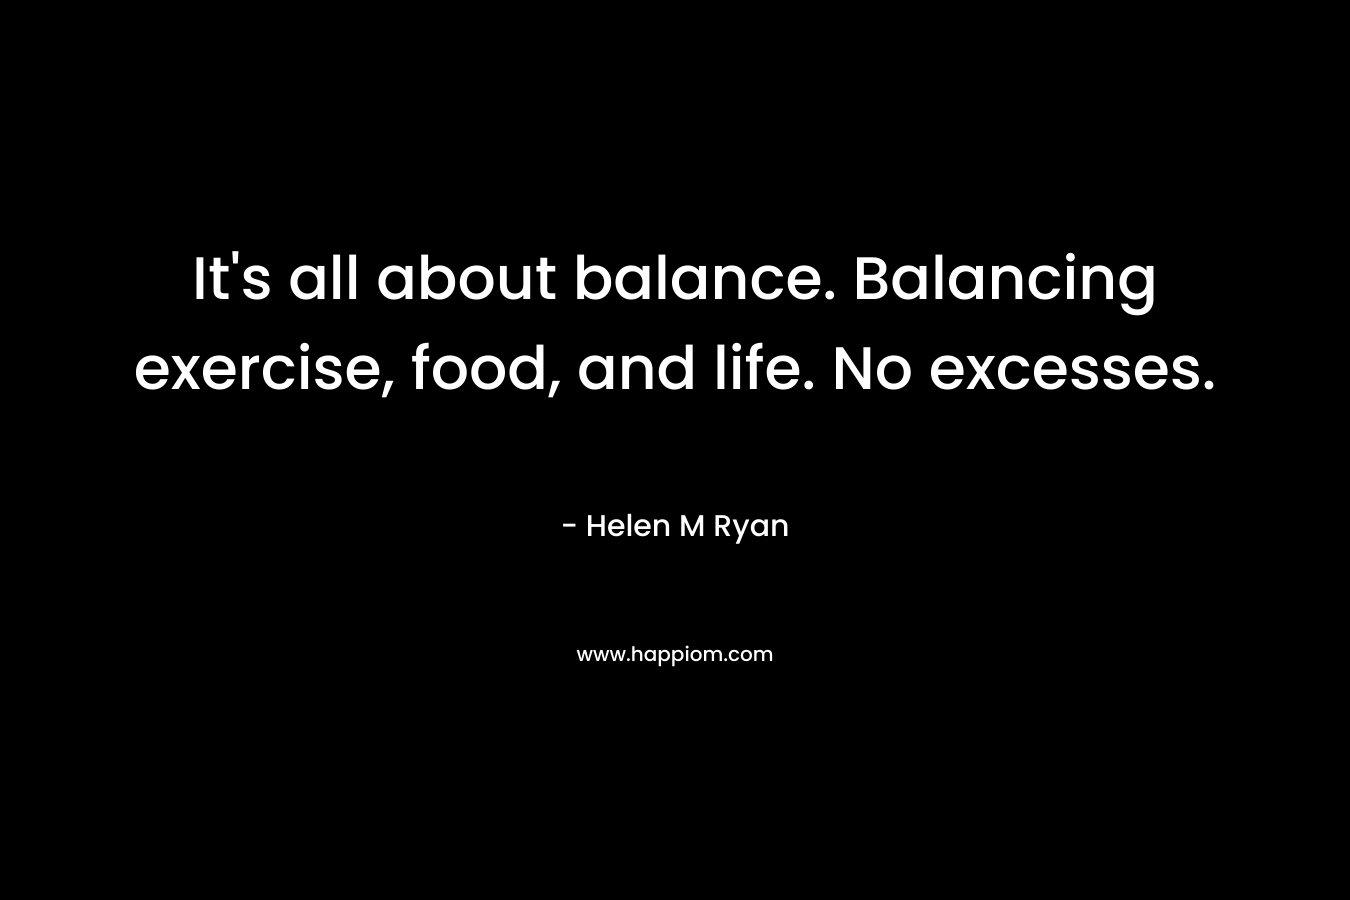 It’s all about balance. Balancing exercise, food, and life. No excesses. – Helen M Ryan